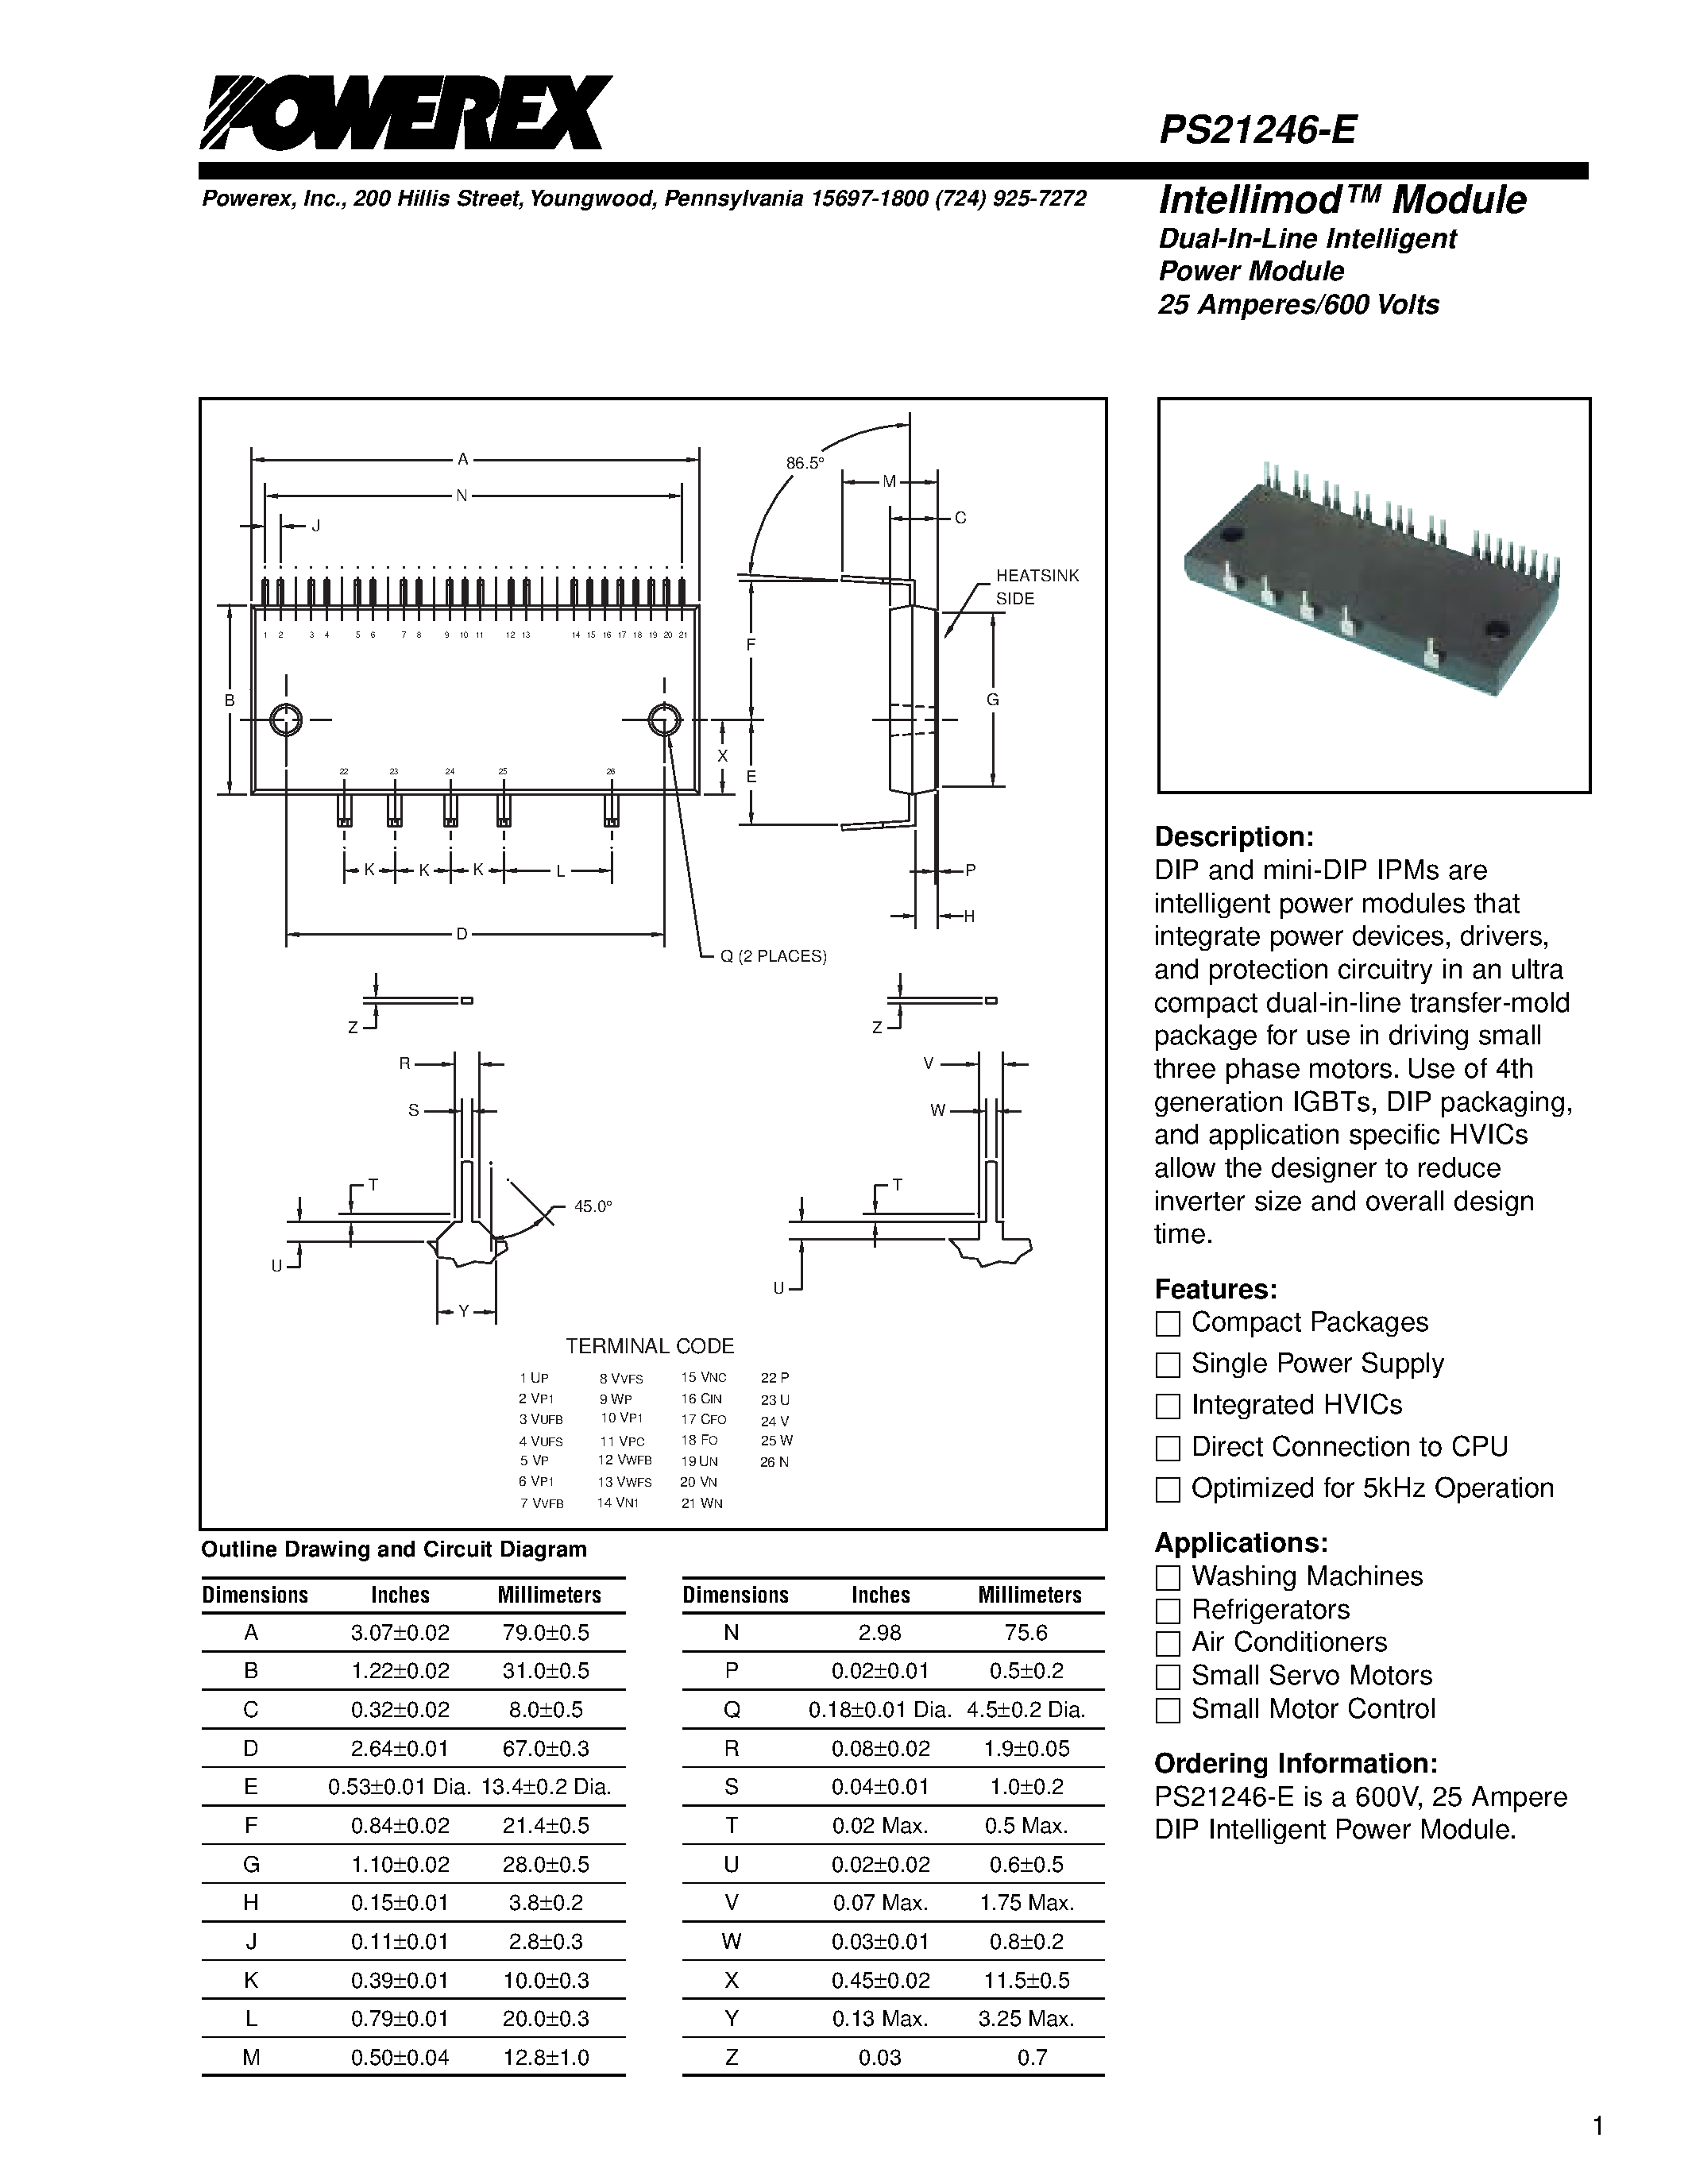 Datasheet PS21246-E - Intellimod Module Dual-In-Line Intelligent Power Module (25 Amperes/600 Volts) page 1